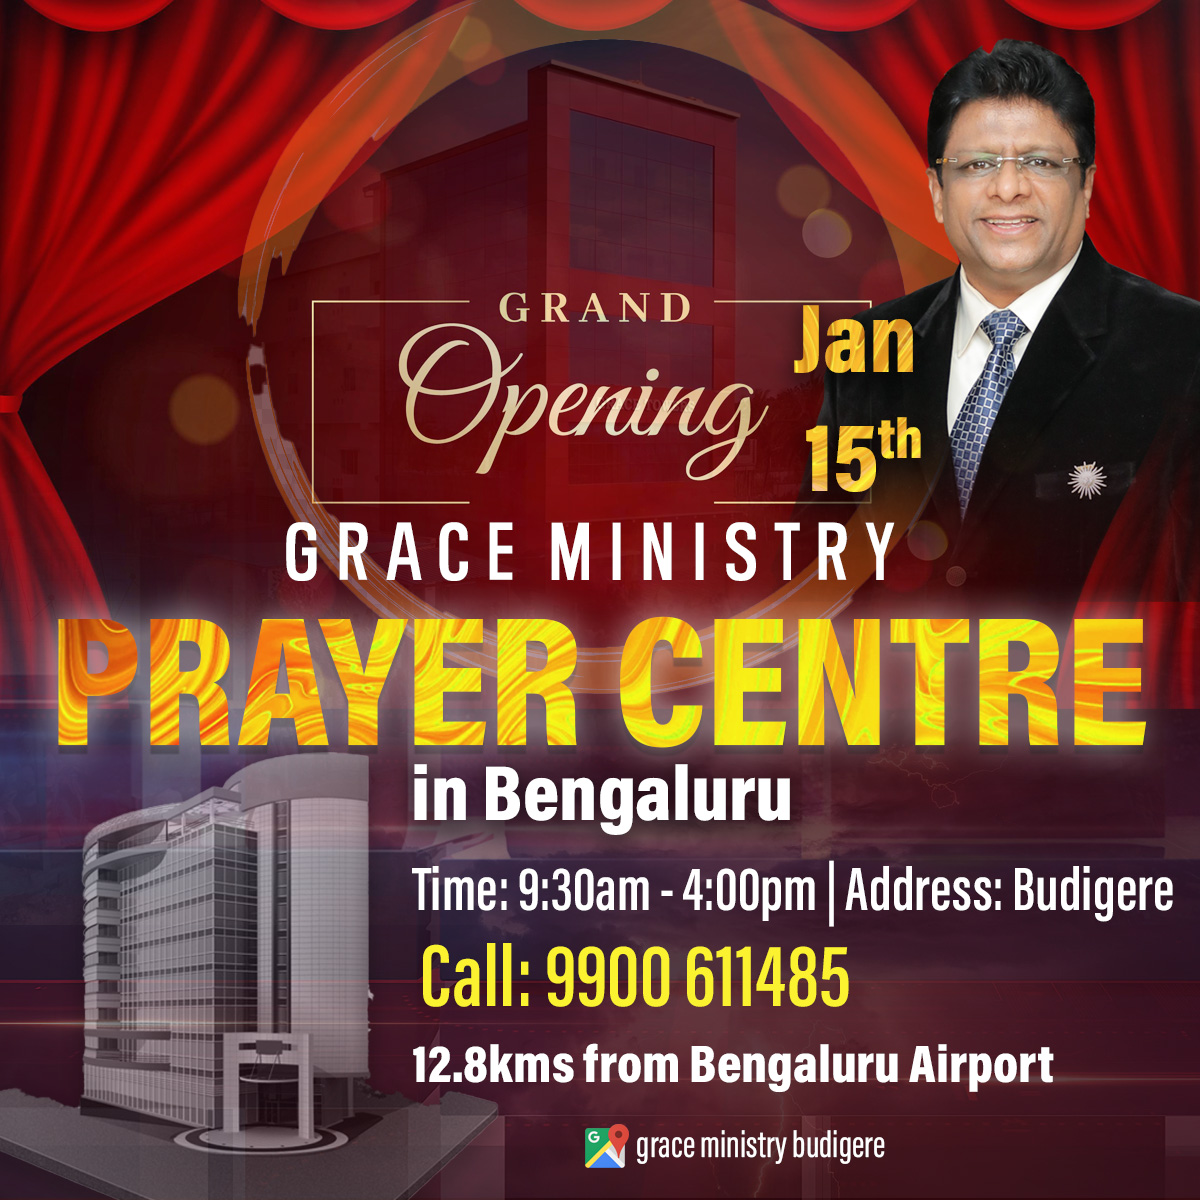 Grace Ministry Welcomes you to the grand opening cermony of Mega Prayer Centre in Bangalore on Jan 15th, 2023 at Budigere near Bengaluru Airport. Come and be blessed. 